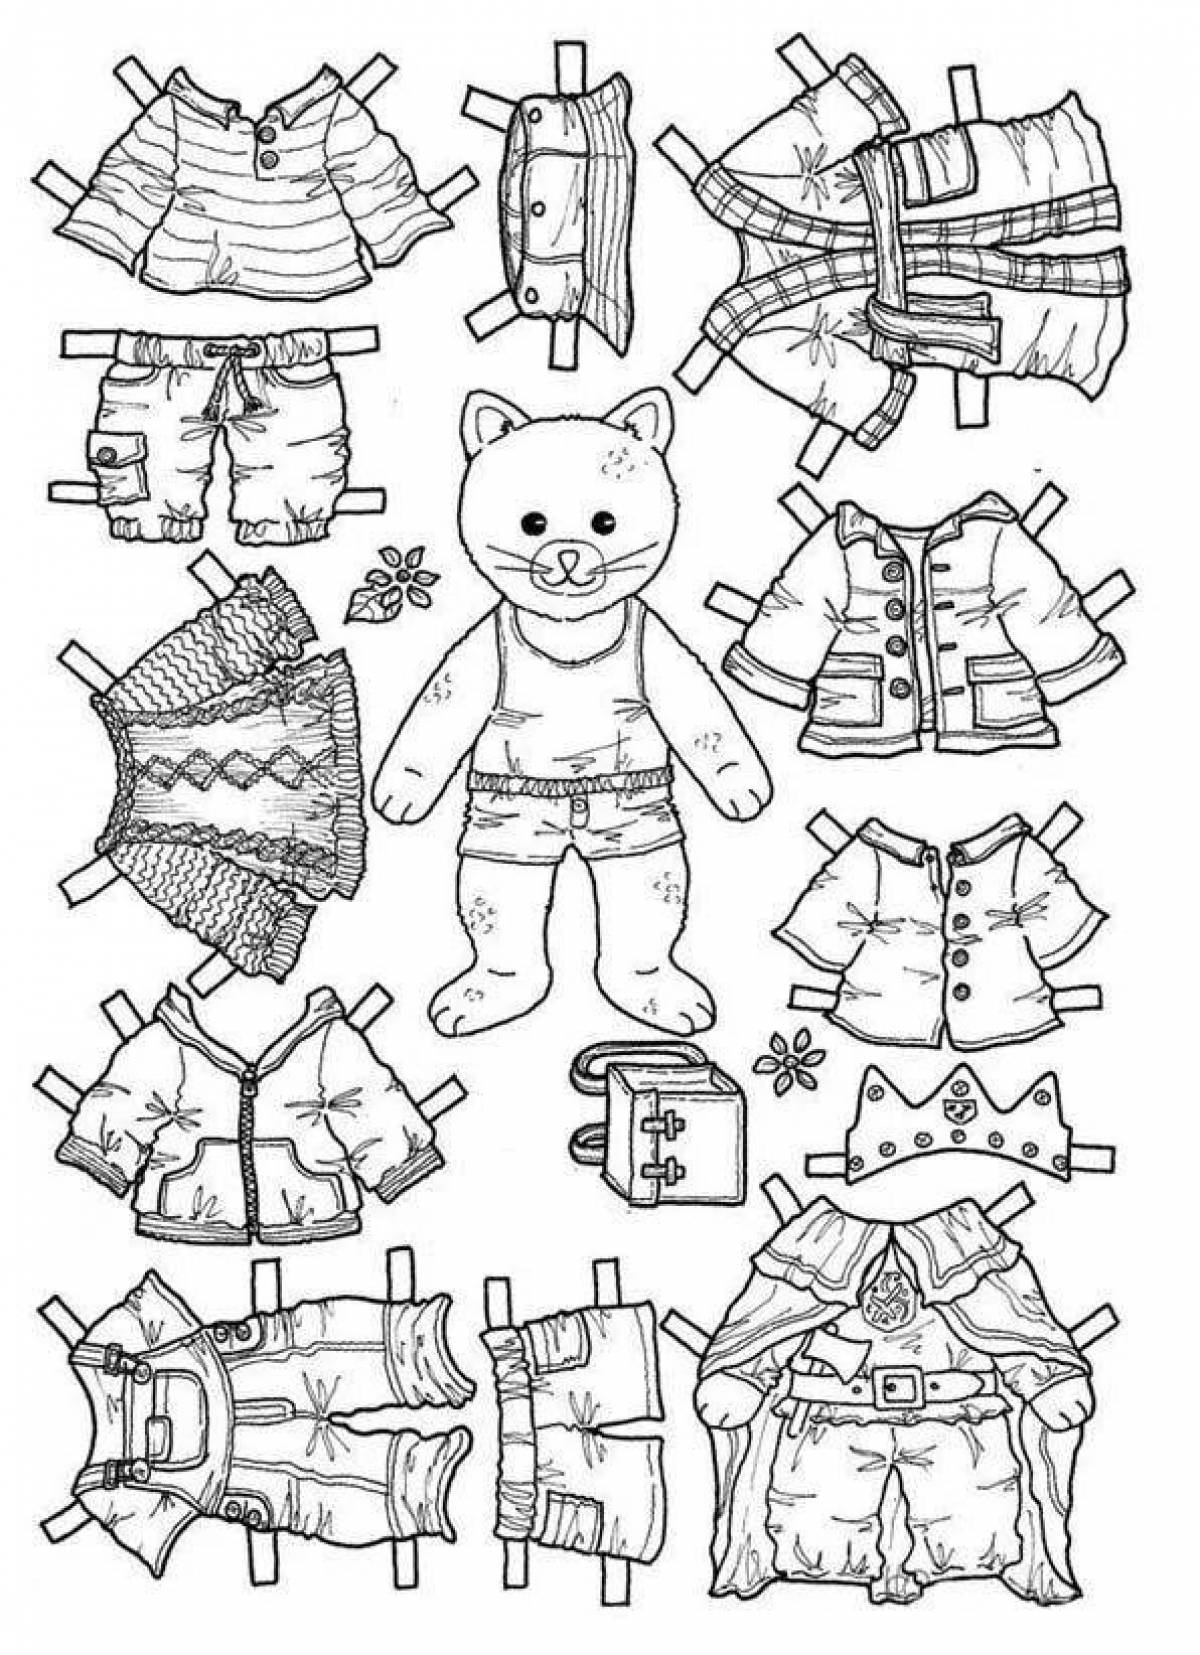 Curious kitten coloring book with clothes